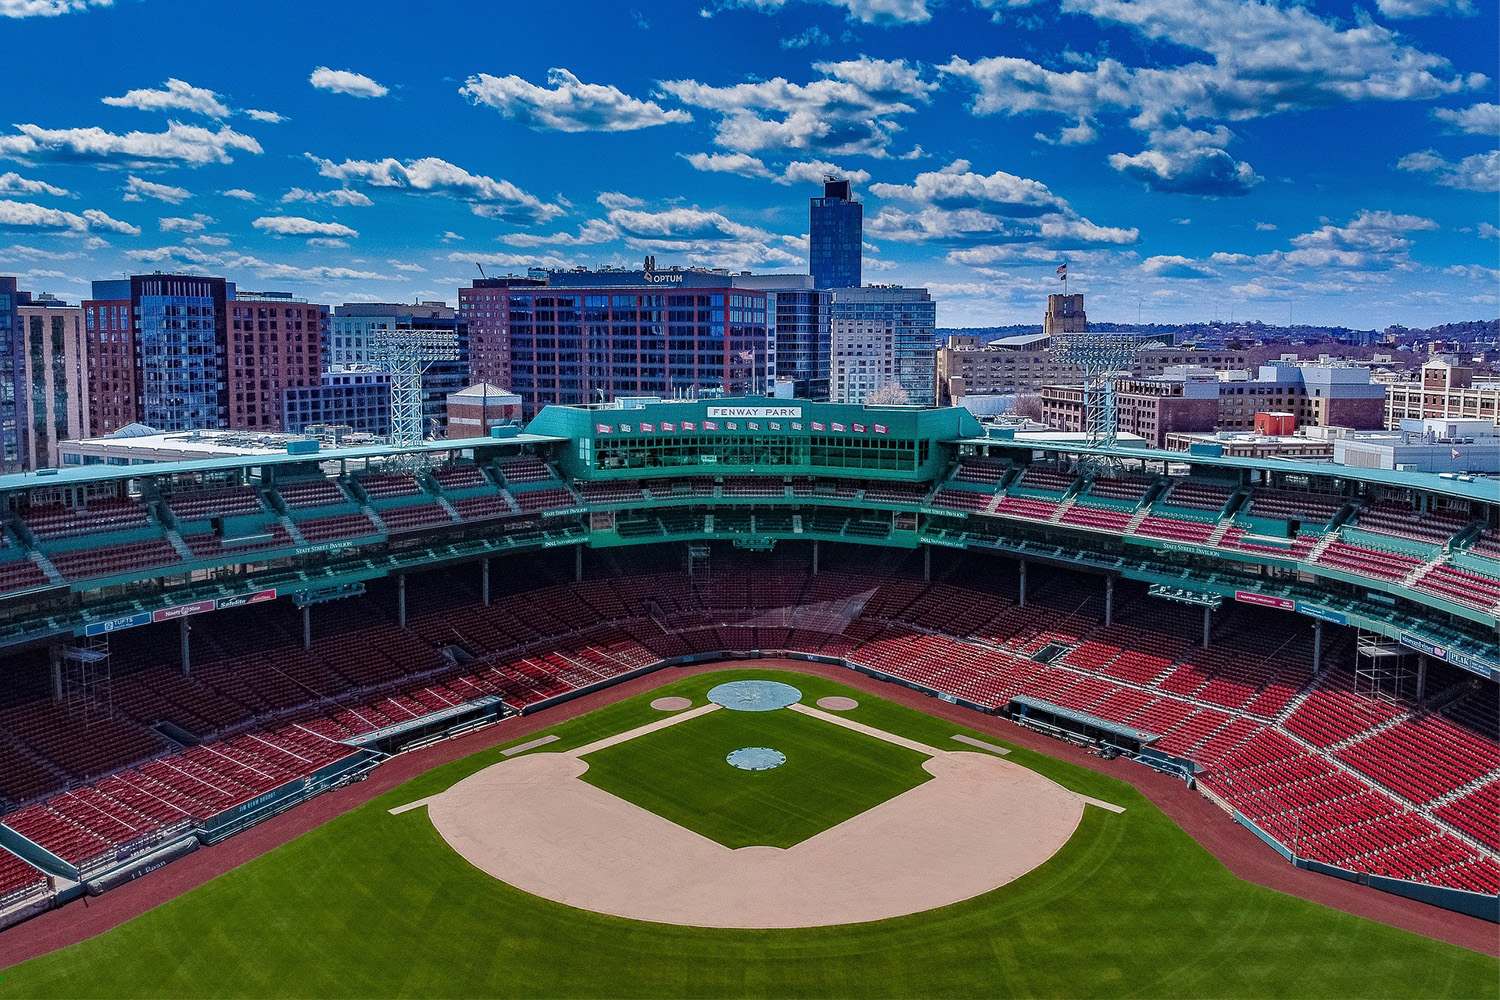 An aerial view of Fenway Park, with view of skyscrapers behind it 